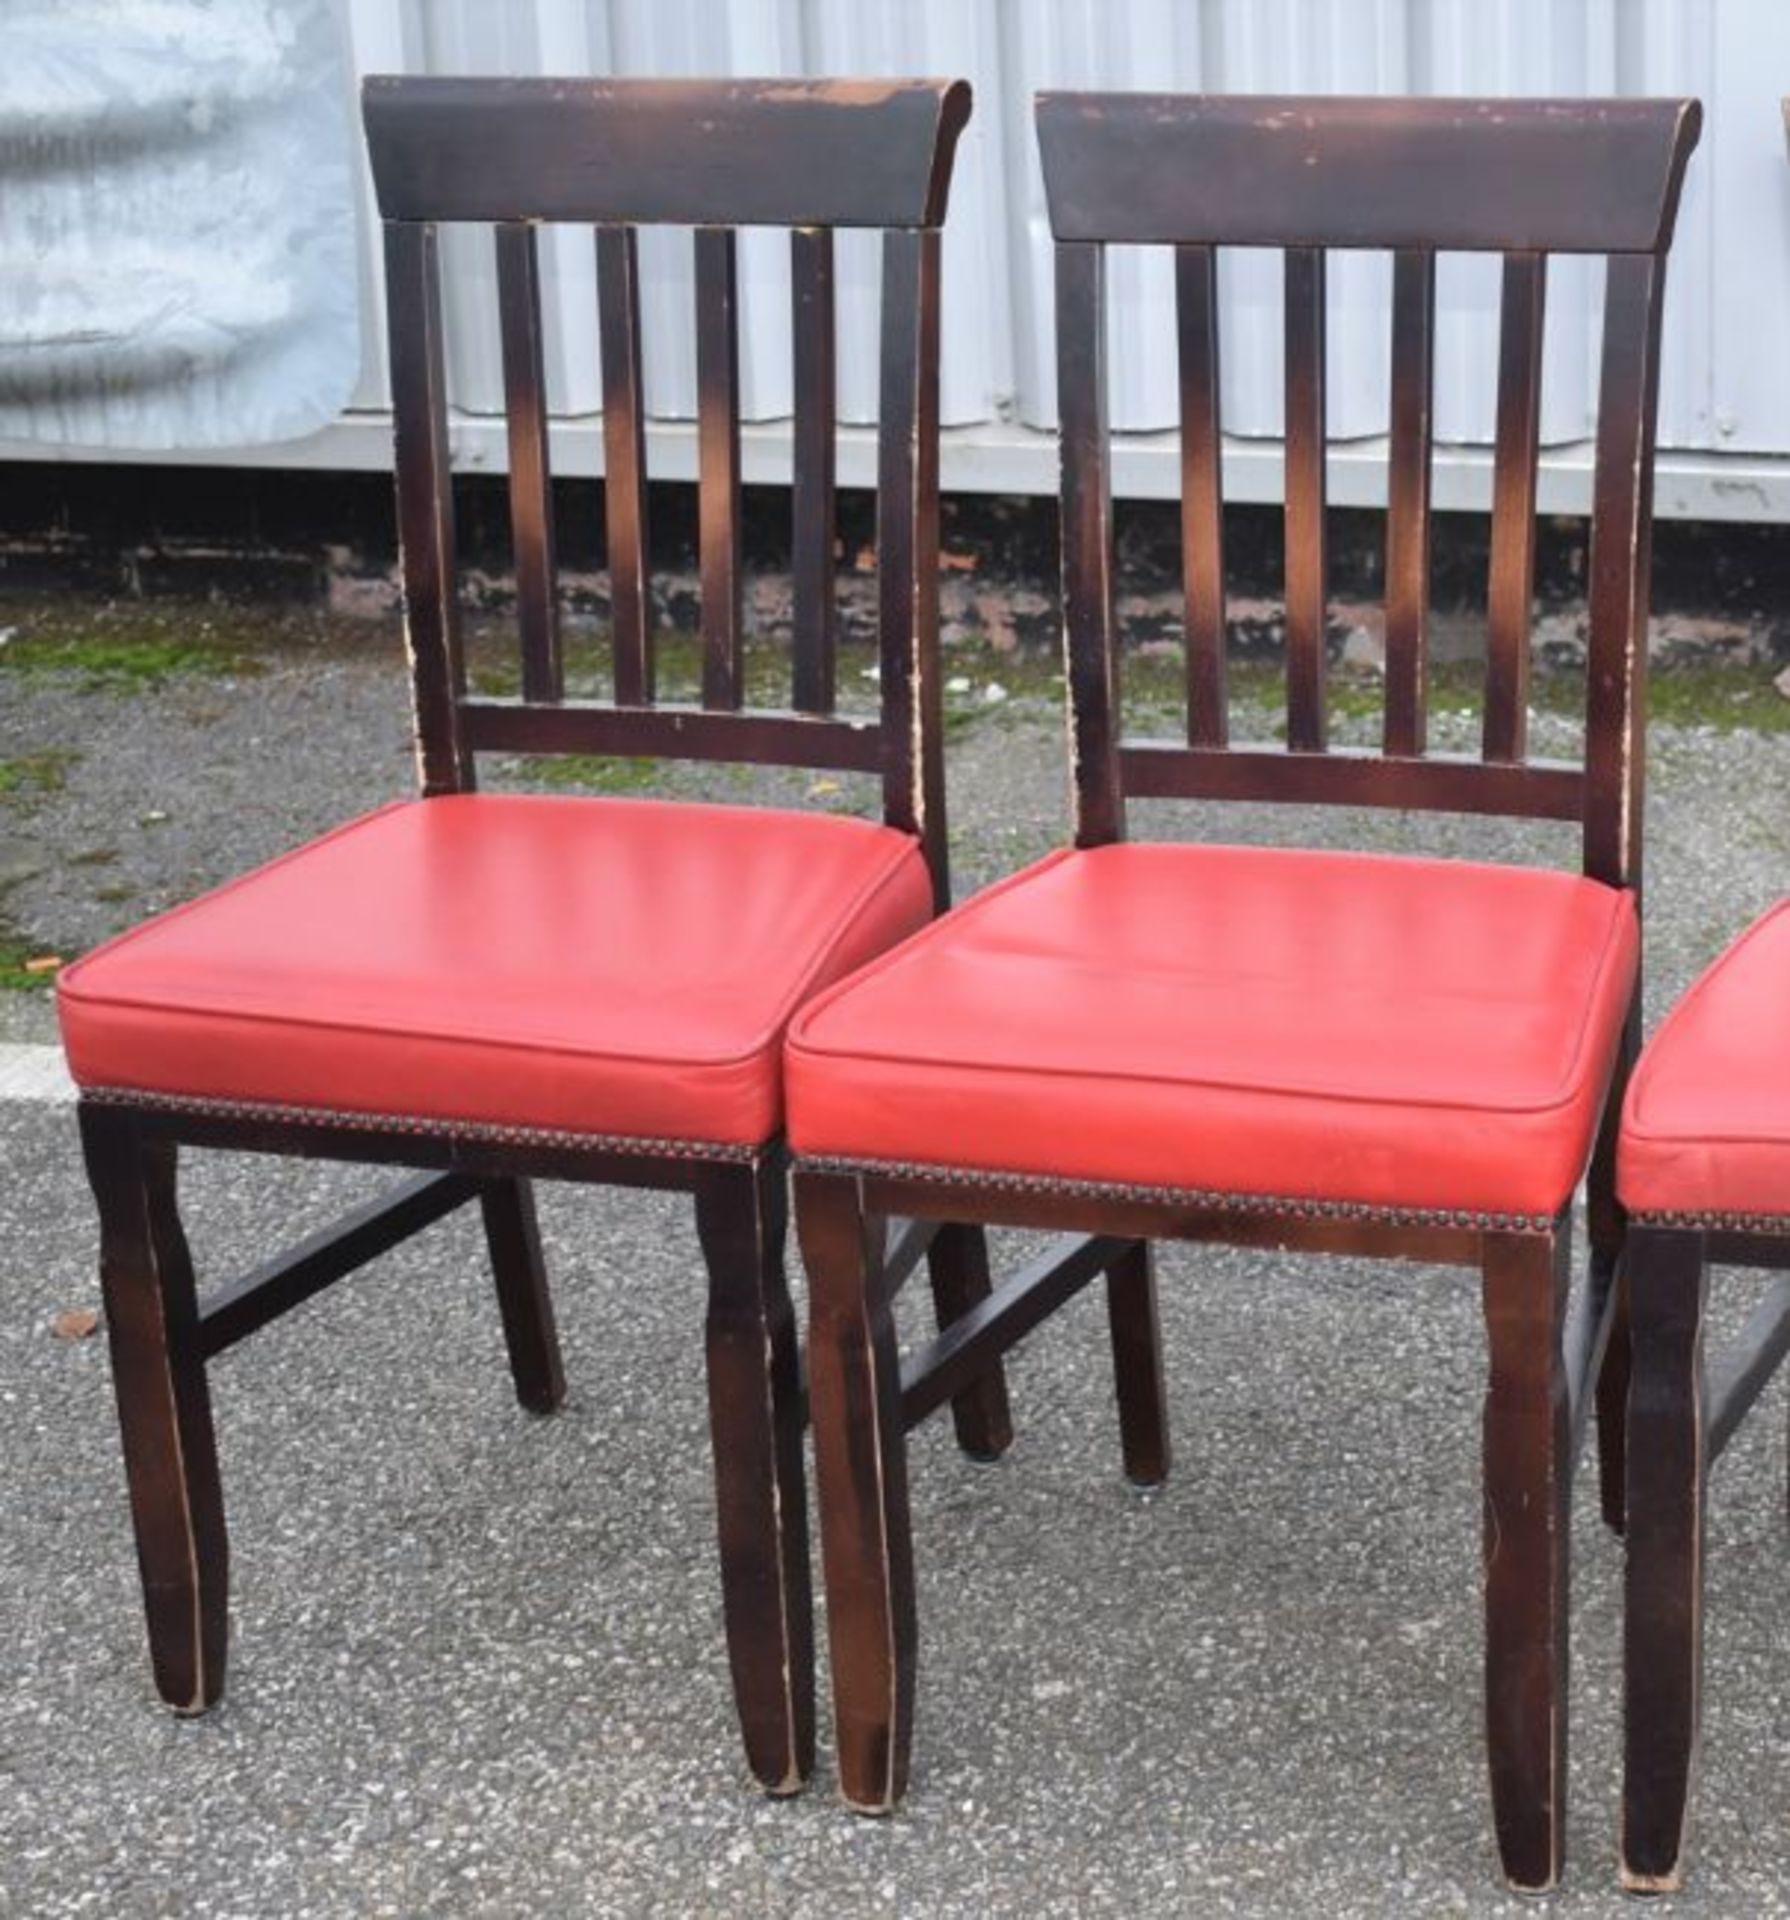 16 x Restaurant Dining Chairs With Dark Stained Wood Finish and Red Leather Seat Pads - Recently - Image 4 of 6